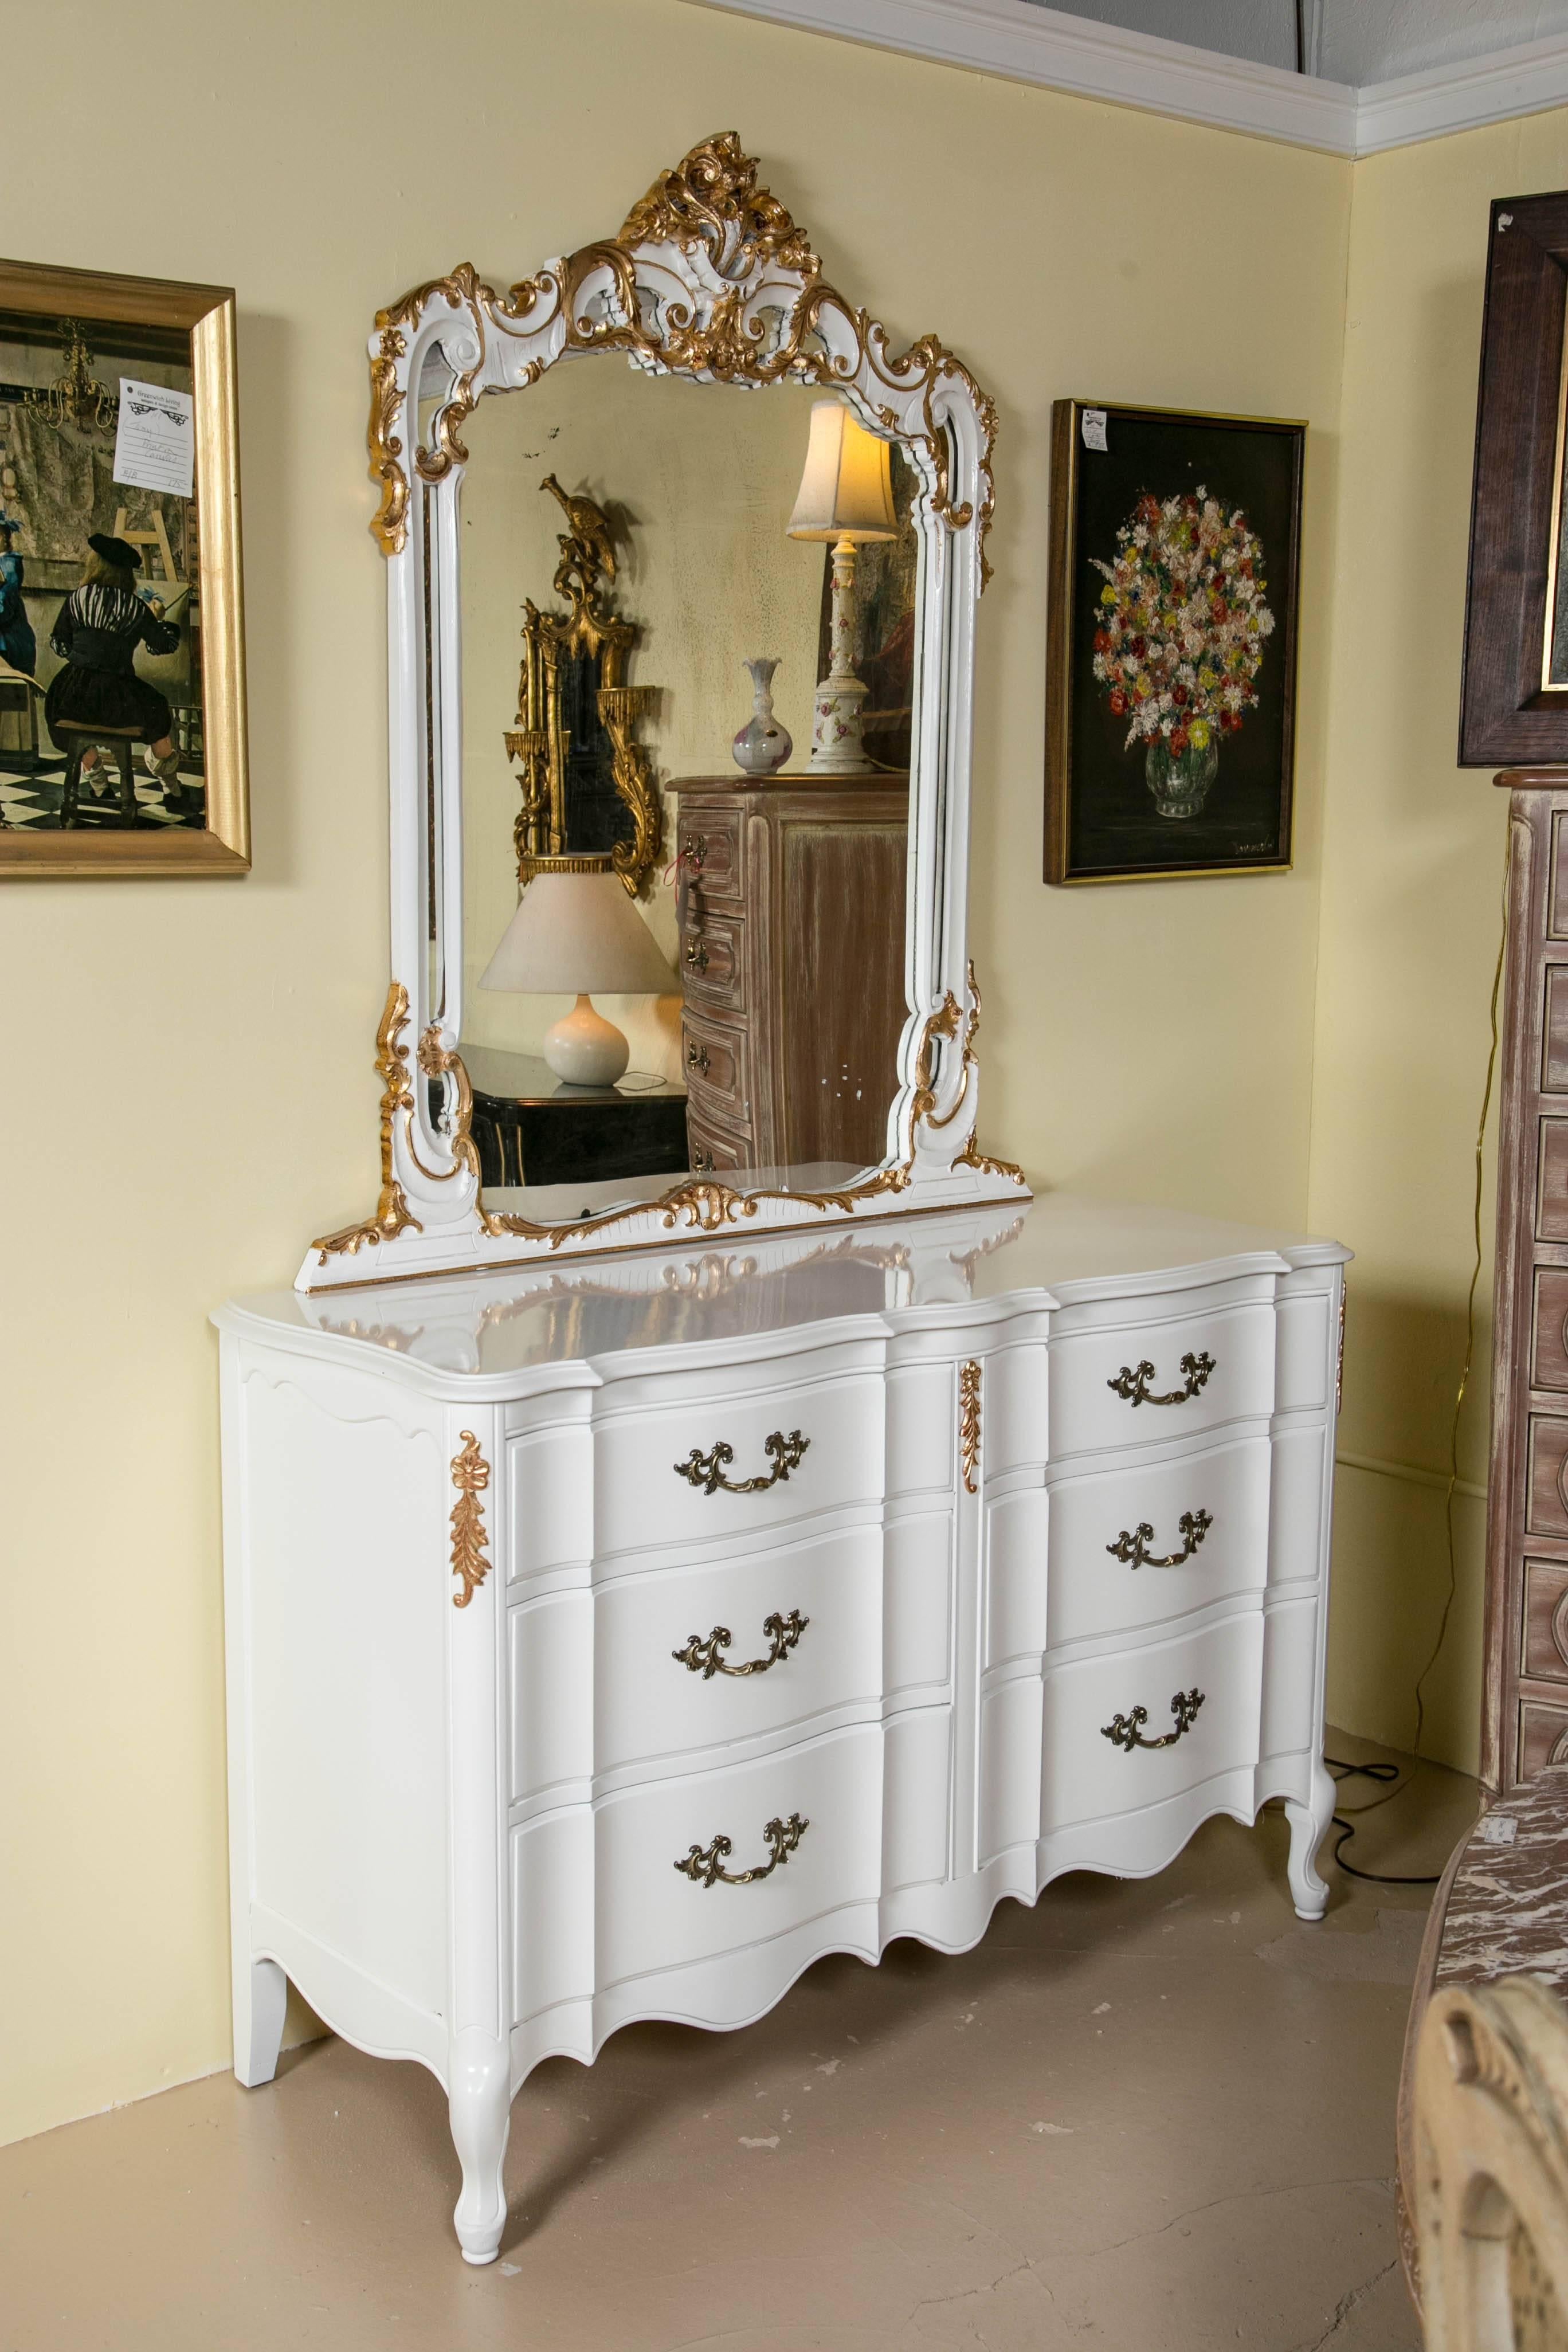 A white and gilt paint decorated double commode. Custom quality with solid wood case finely painted in a winter white with gilt gold hi lights and solid bronze pulls. The Louis XV style double commode has three by three drawers and a matching mirror